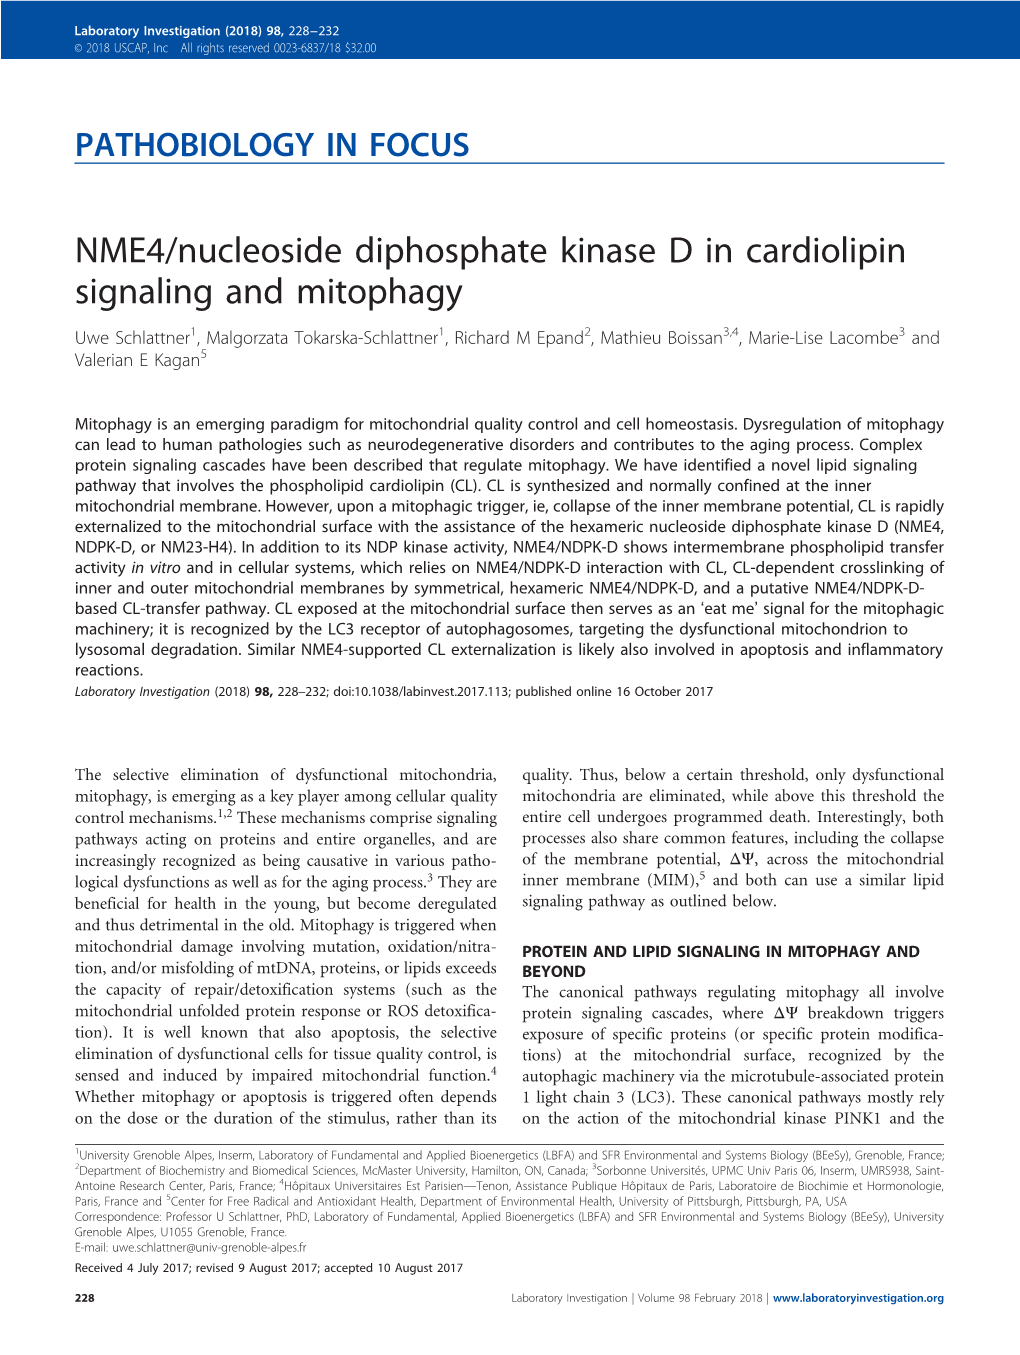 NME4/Nucleoside Diphosphate Kinase D in Cardiolipin Signaling And